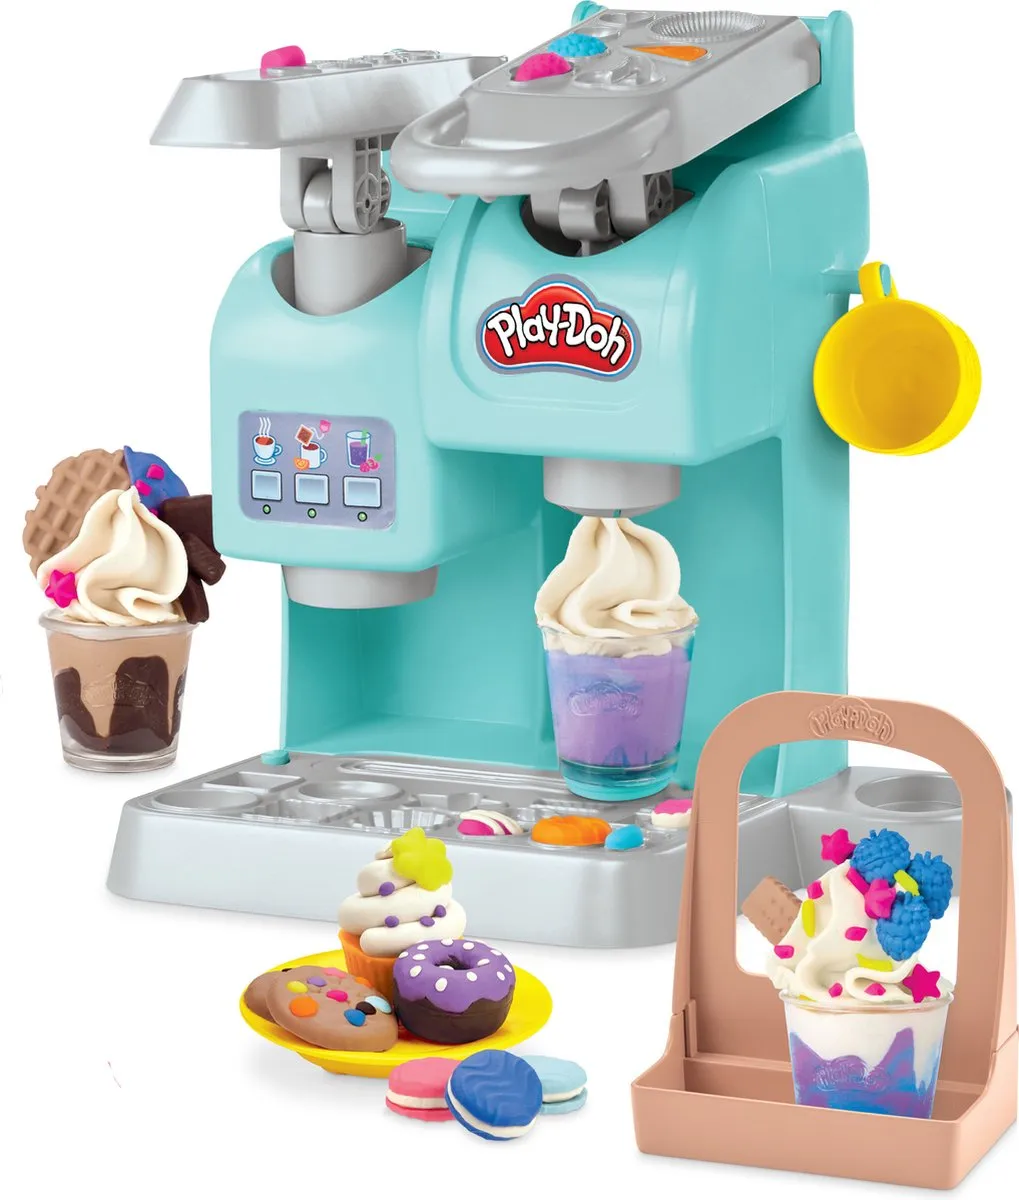 Play-Doh Super Colorful Café Playset - Klei Speelset speelgoed